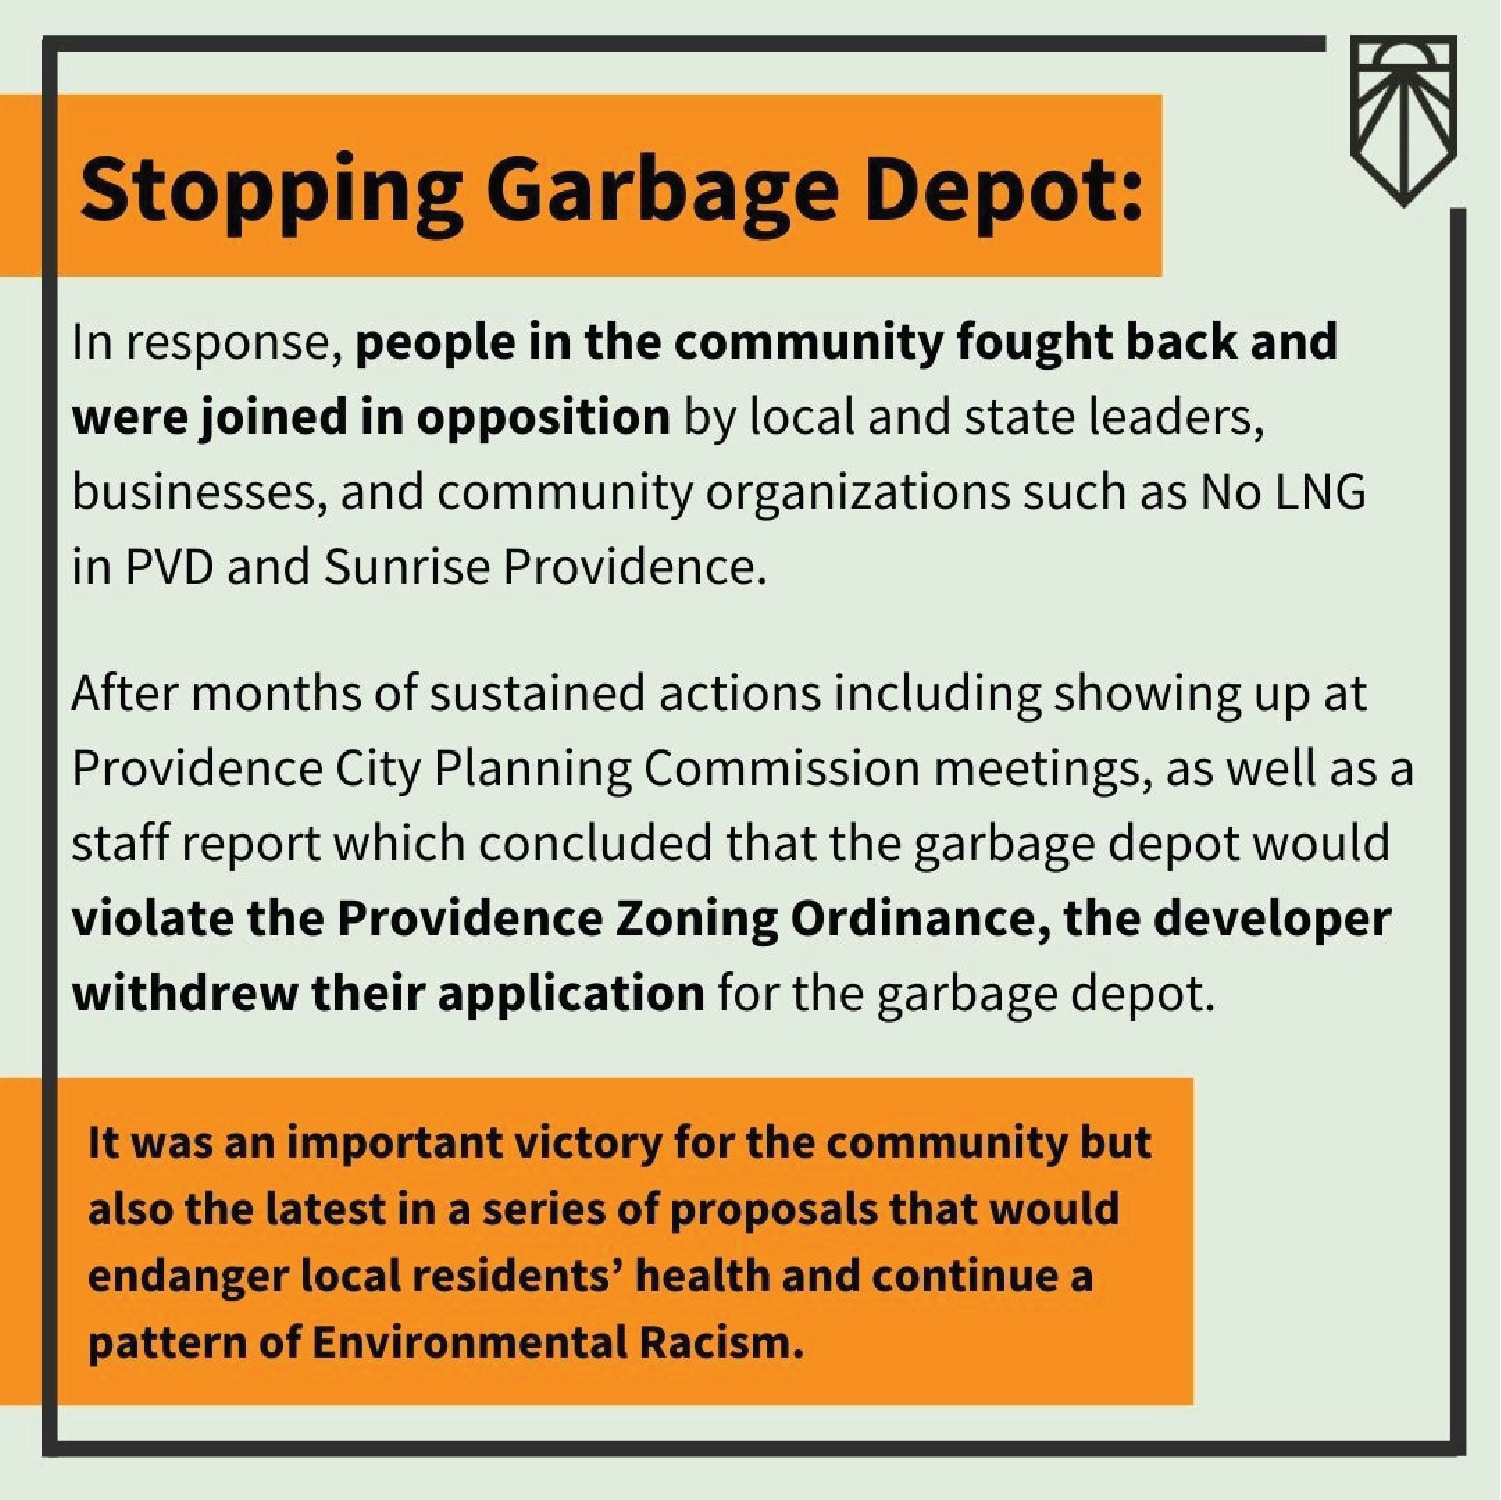 Graphic reads: In response, people in the community fought back and were joined in opposition by local and state leaders, businesses, and community organizations such as No LNG in PVD and Sunrise Providence. After months of sustained actions including showing up at Providence City Planning Commission meetings, as well as a staff report which concluded that the garbage depot would violate the Providence Zoning Ordinance, the developer withdrew their application for the garbage depot. It was an important victory for the community but also the latest in a series of proposals that would endanger local residents’ health and continue a pattern of Environmental Racism.